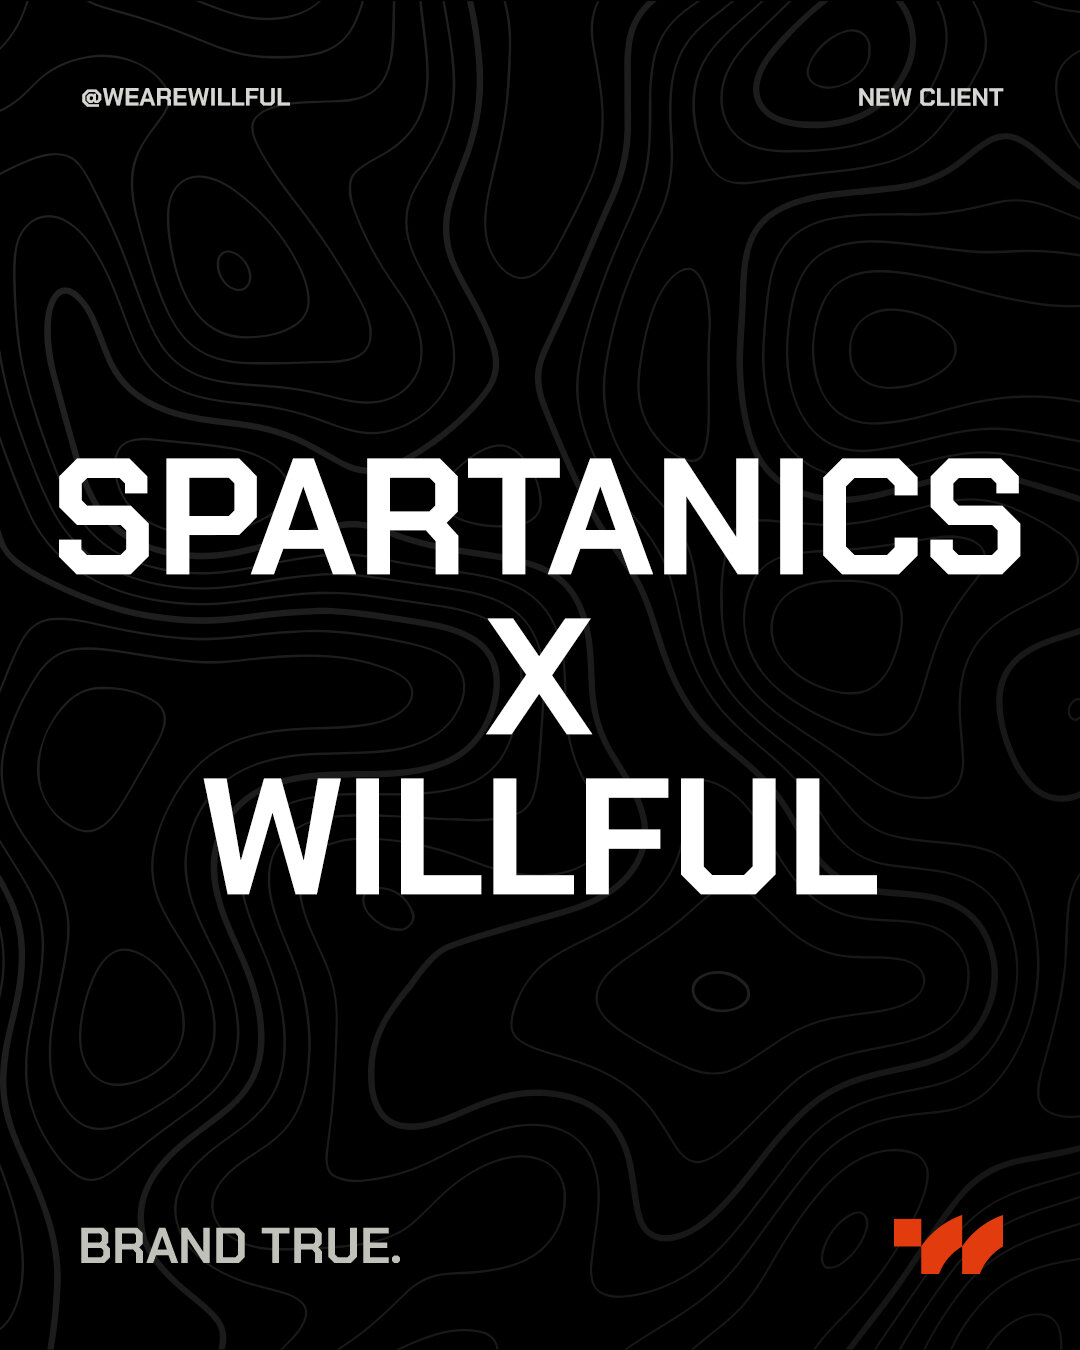 NEW CLIENT: 

We are delighted &amp; proud to have the opportunity to work with SPARTANICS as their new creative partner. We're excited to help them develop their new brand identity and website.

#newclient #madebywillful #brandtrue #brandingagency #